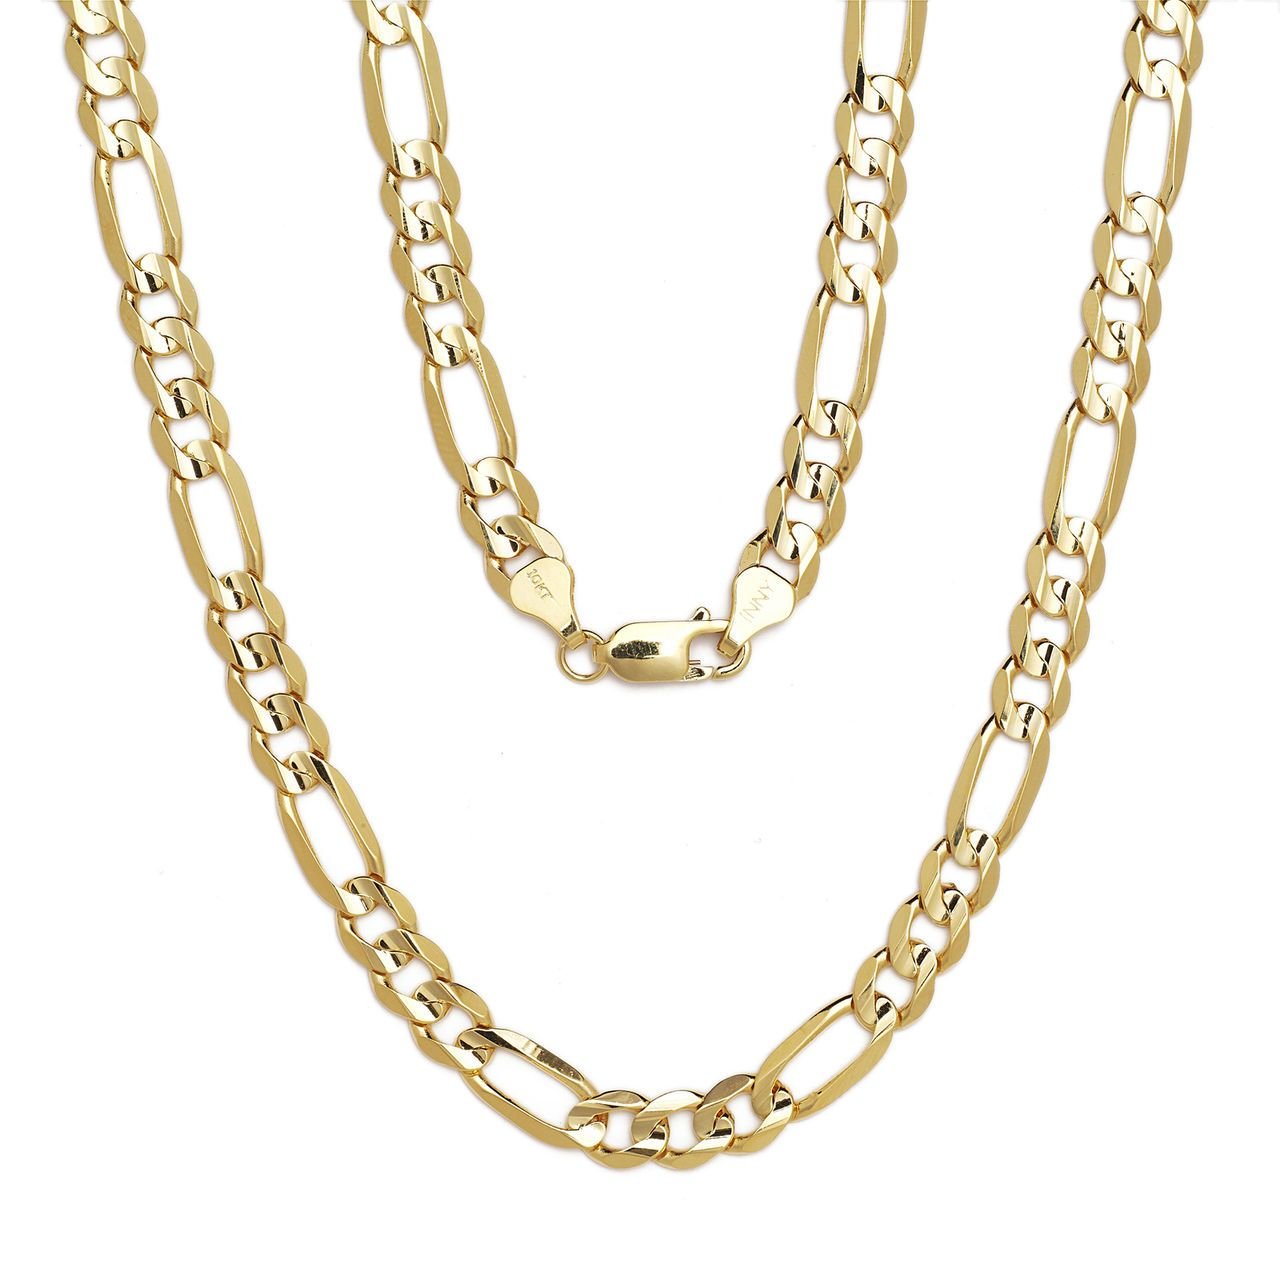 10k Yellow Gold Figaro Chain Necklace with Concave Look, 0.44 Inch (11.2mm)